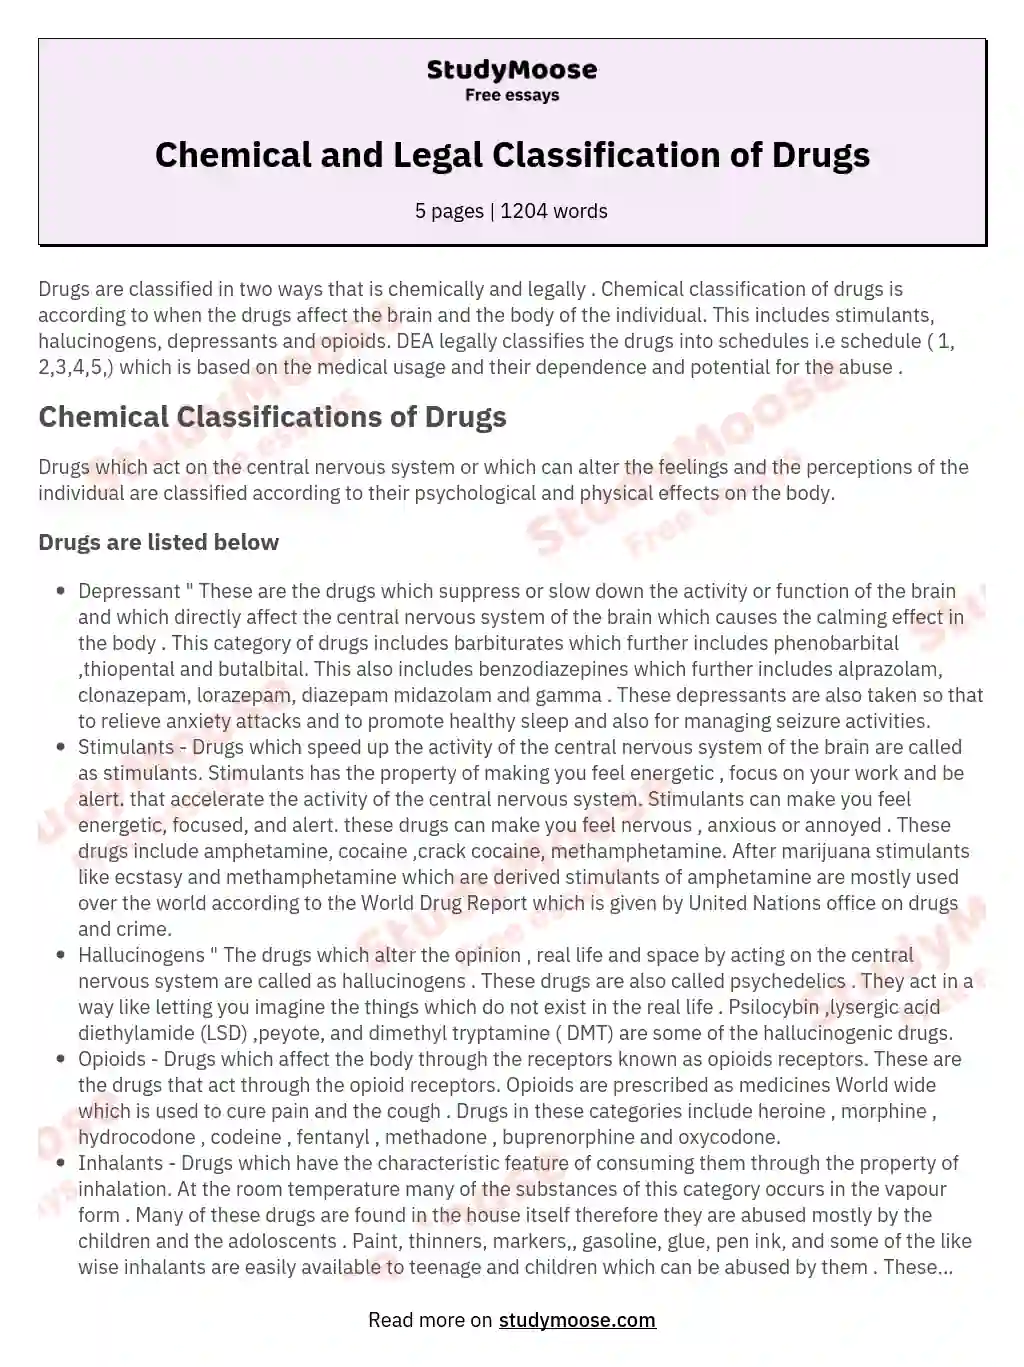 Chemical and Legal Classification of Drugs essay